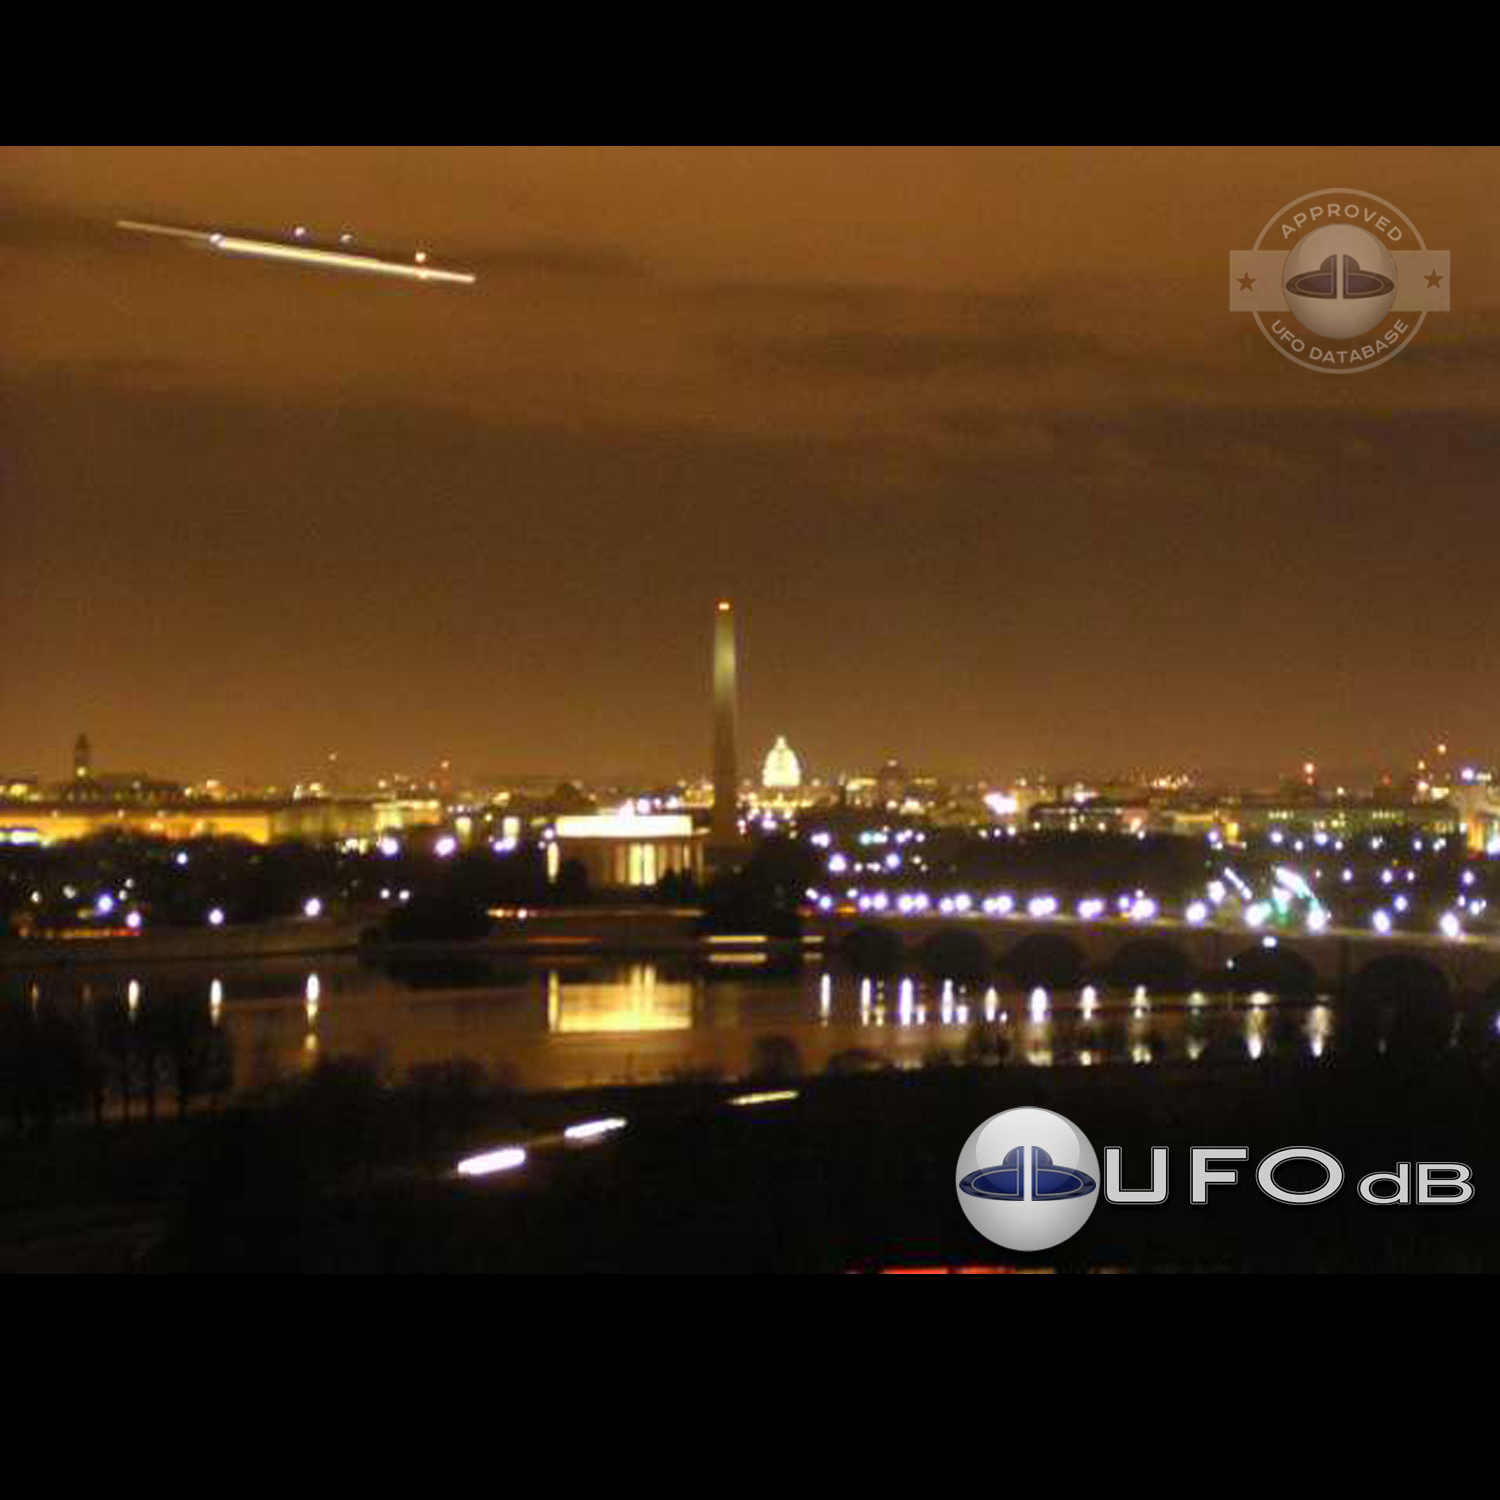 UFO Picture captured by the webcam of the National Park service UFO Picture #84-1